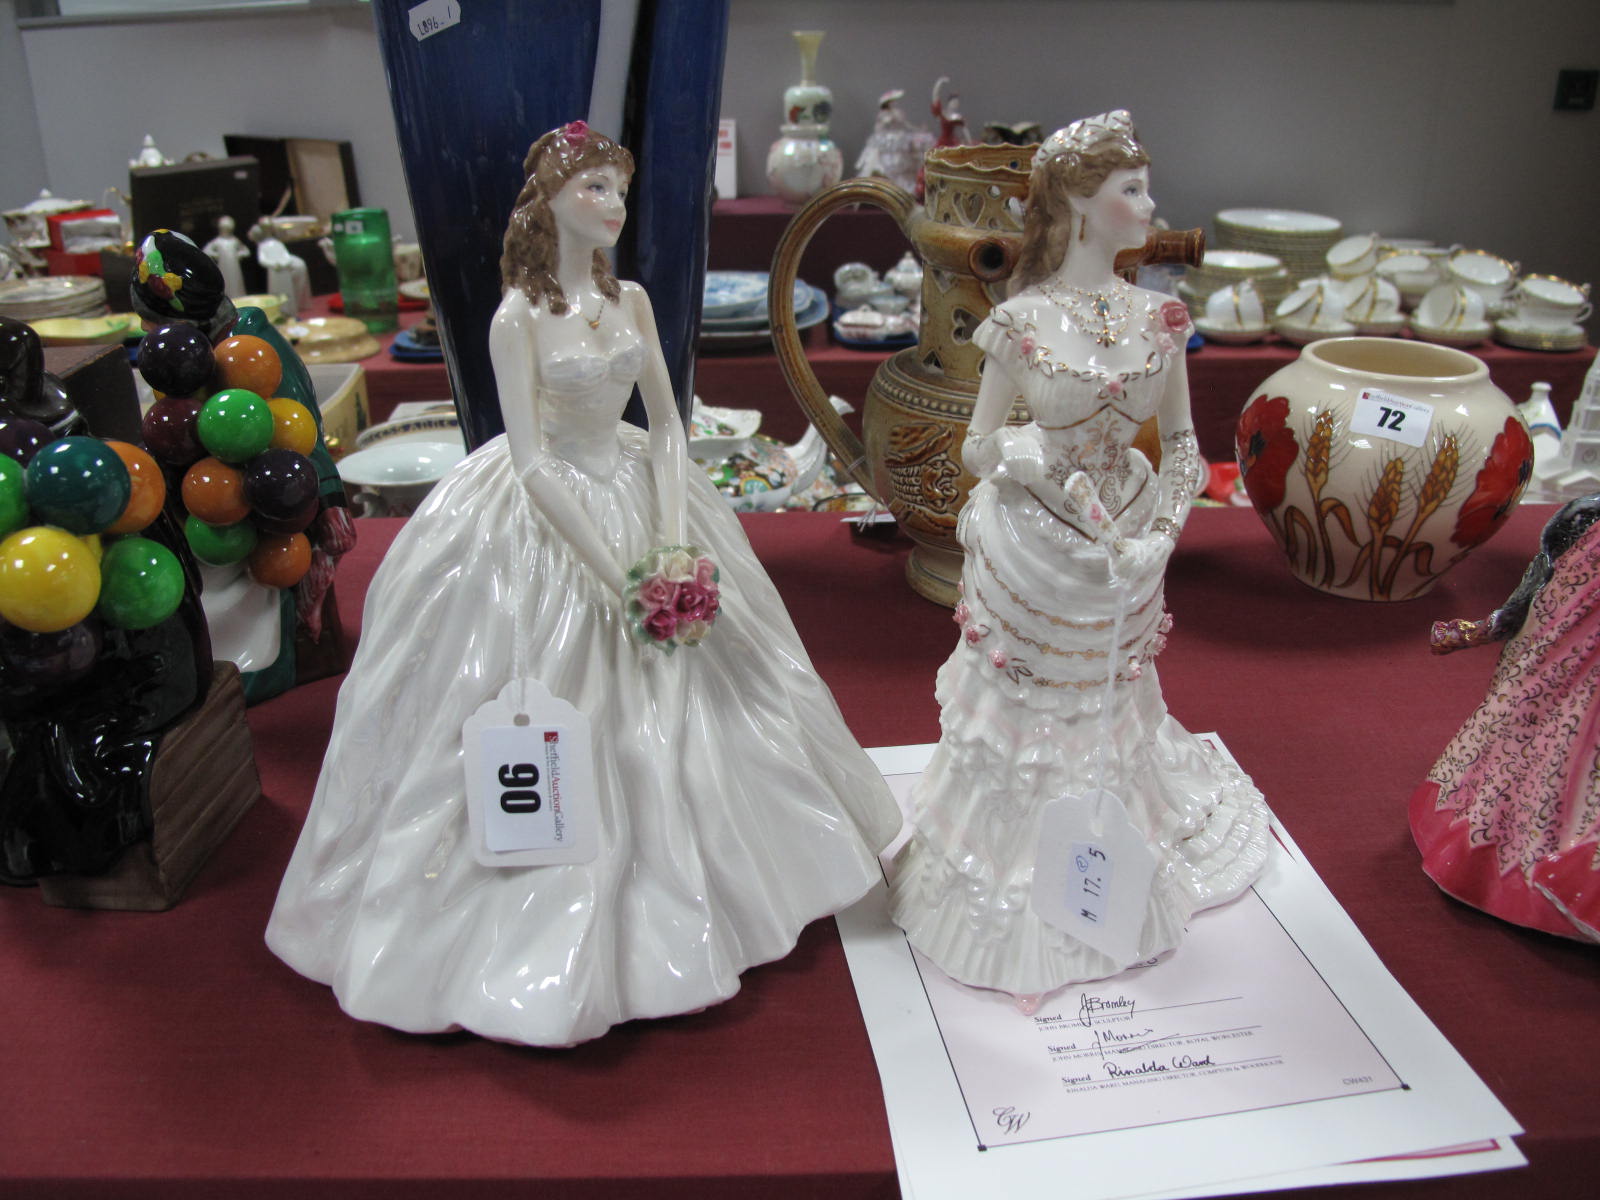 Royal Worcester China Figurines, 'A Day to Remember' CW395, 'A Dazzling Celebration' CW431. (2)